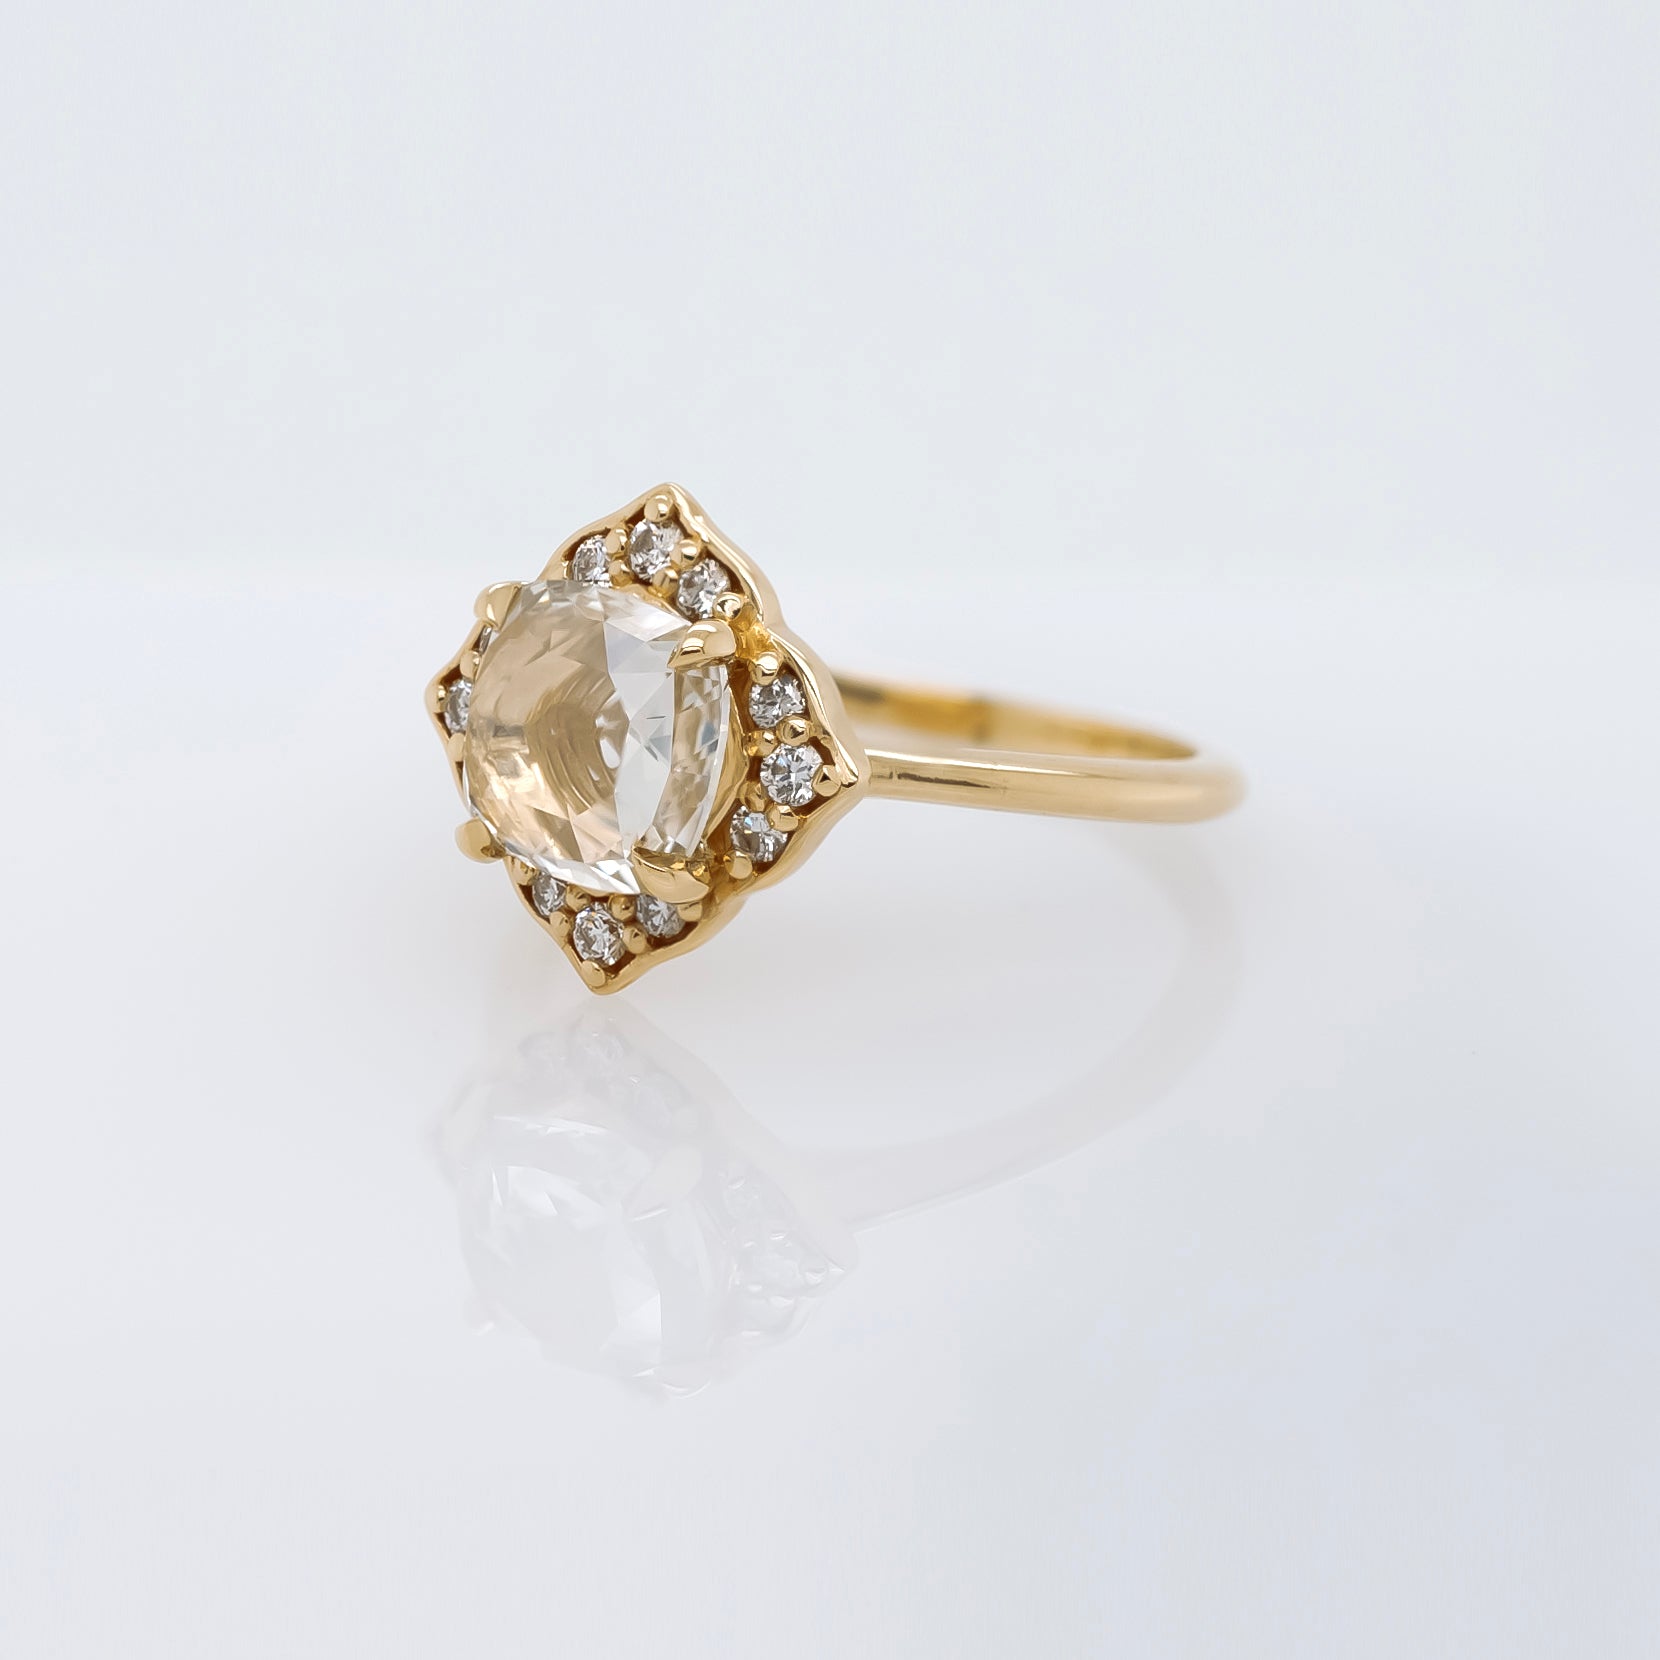 The Maeve Ring